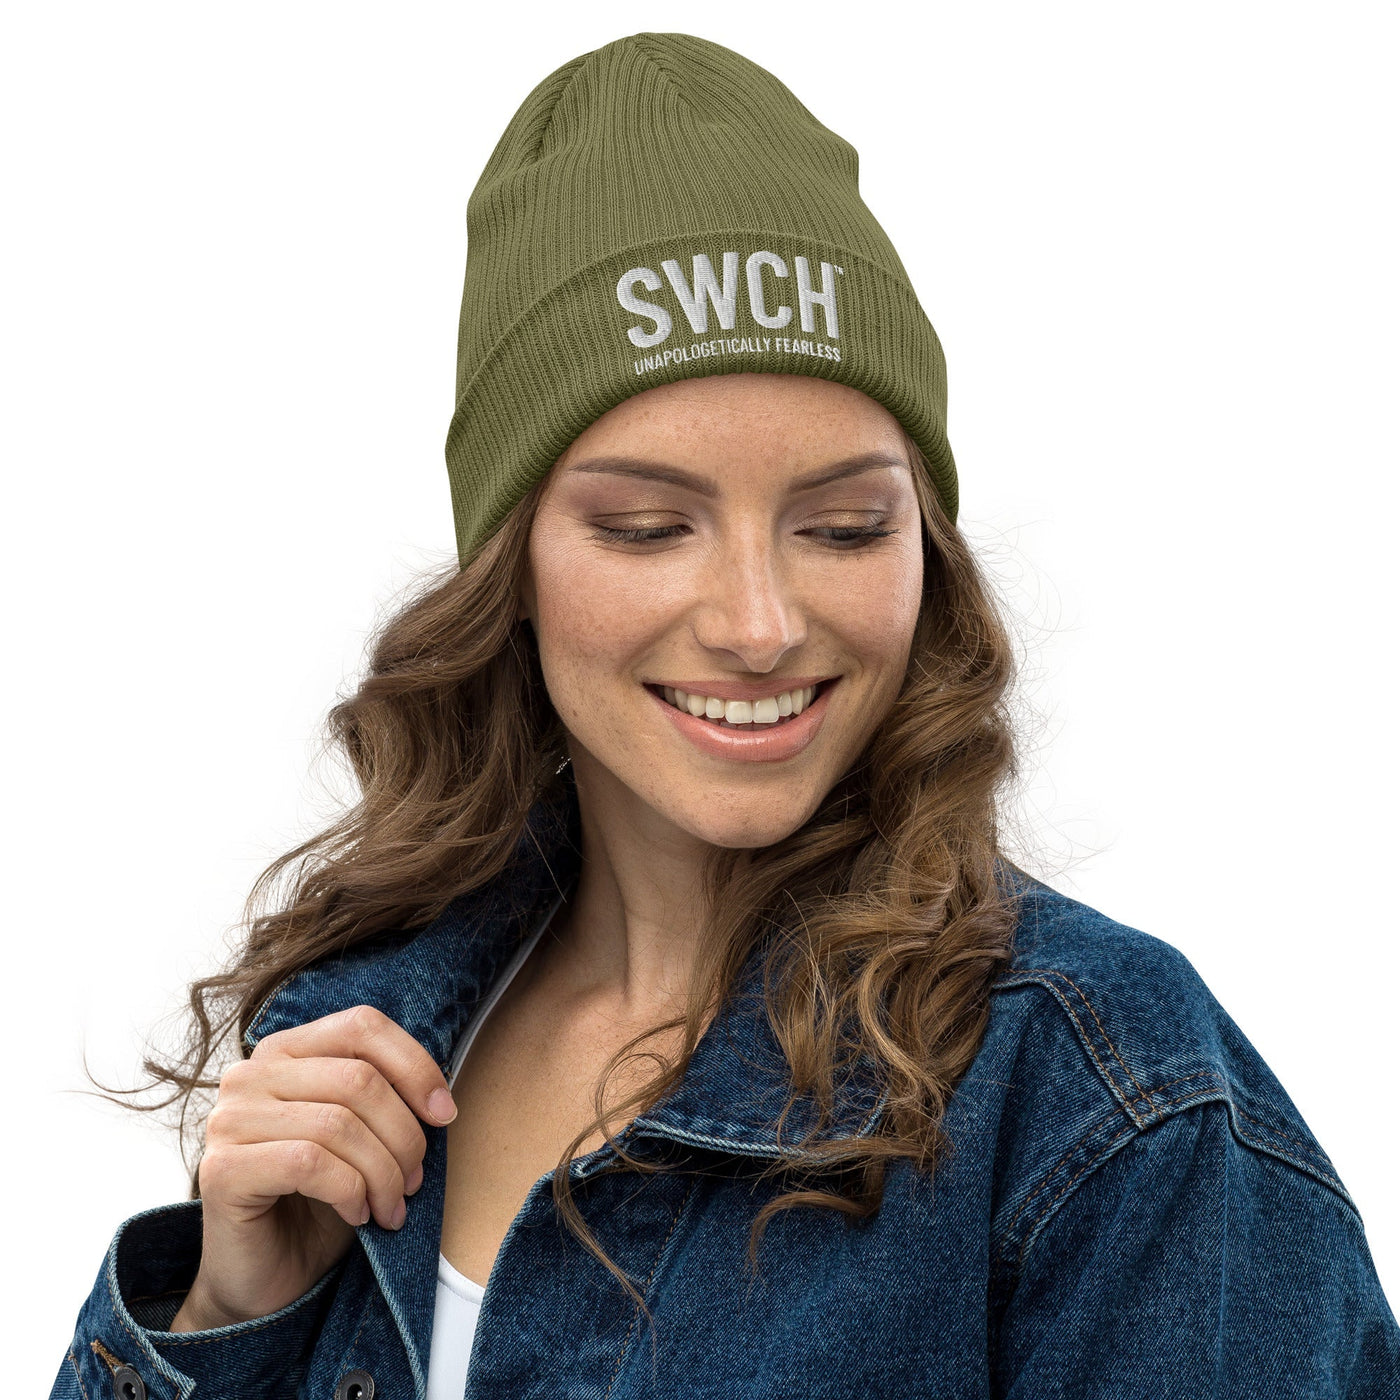 Get trendy with Organic ribbed SWCH beanie -  available at SWCH Store. Grab yours for £16 today!